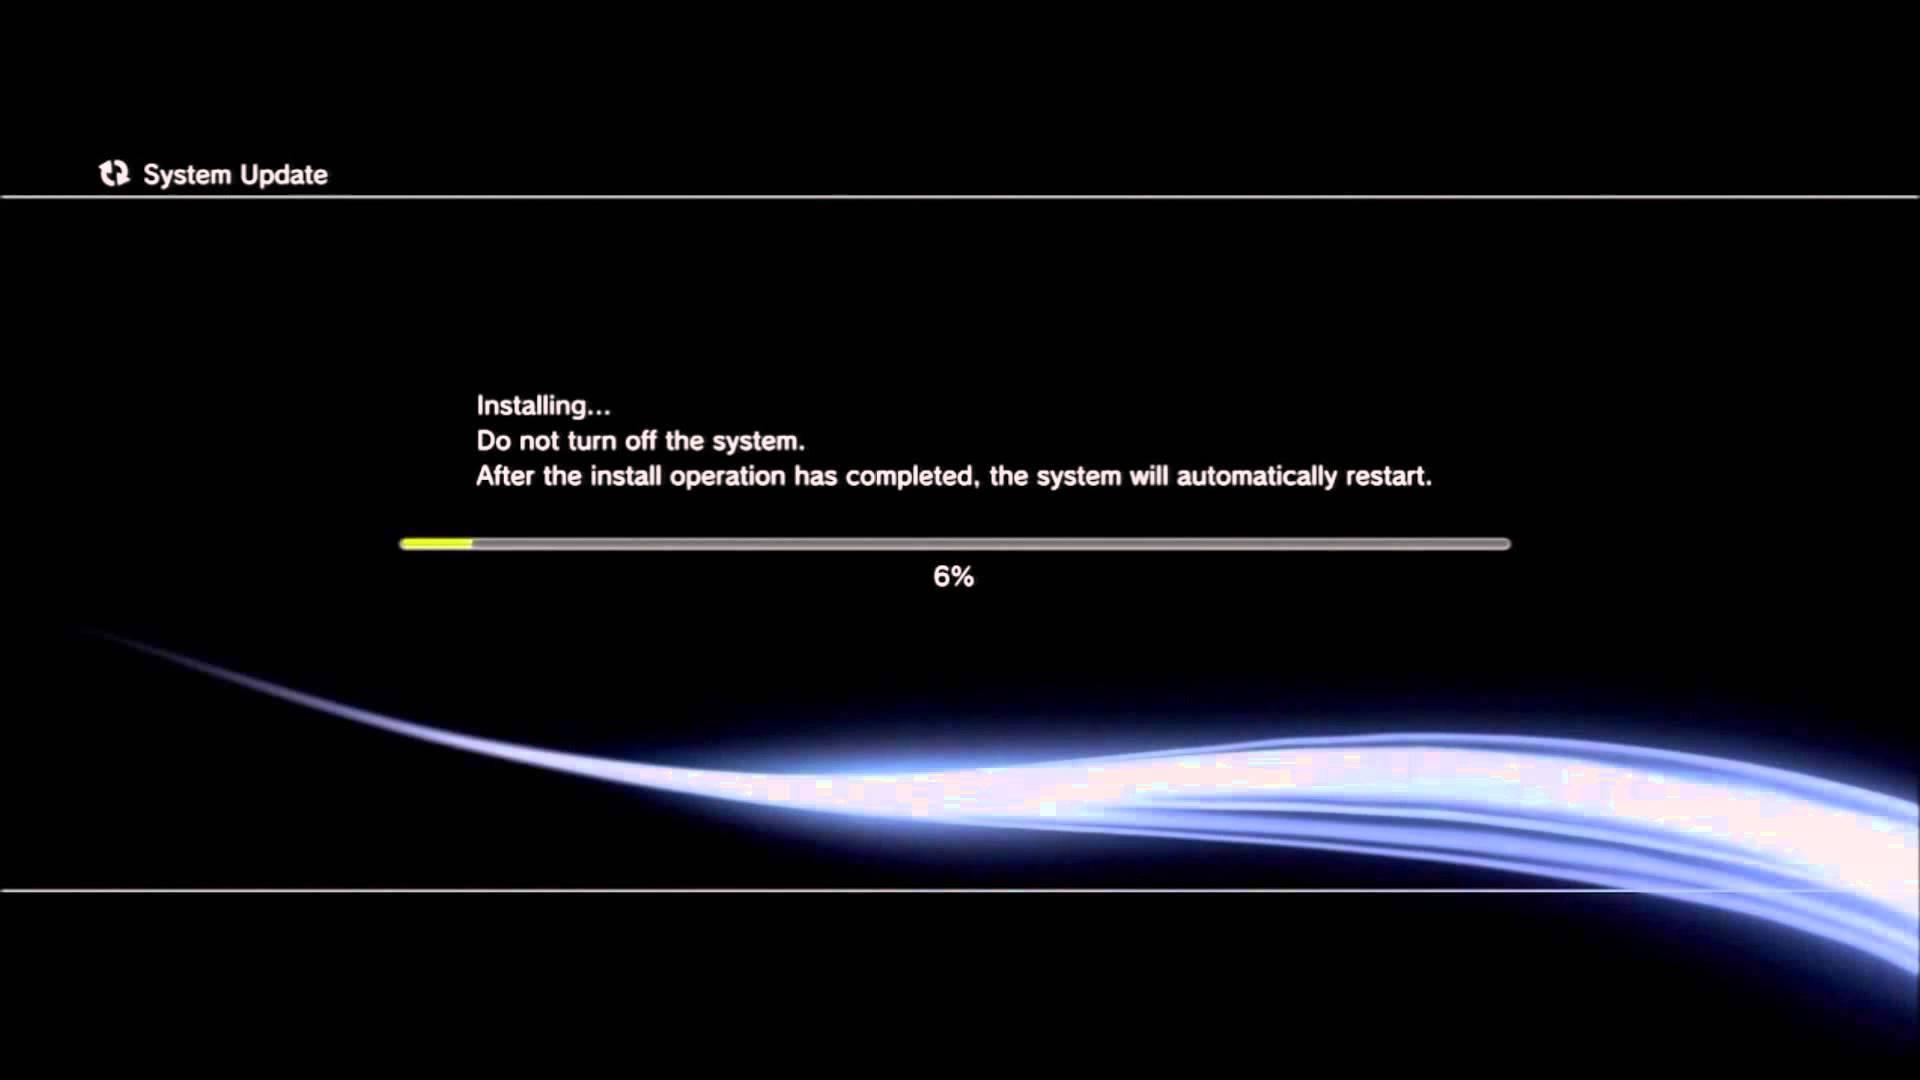 PS3-firmware